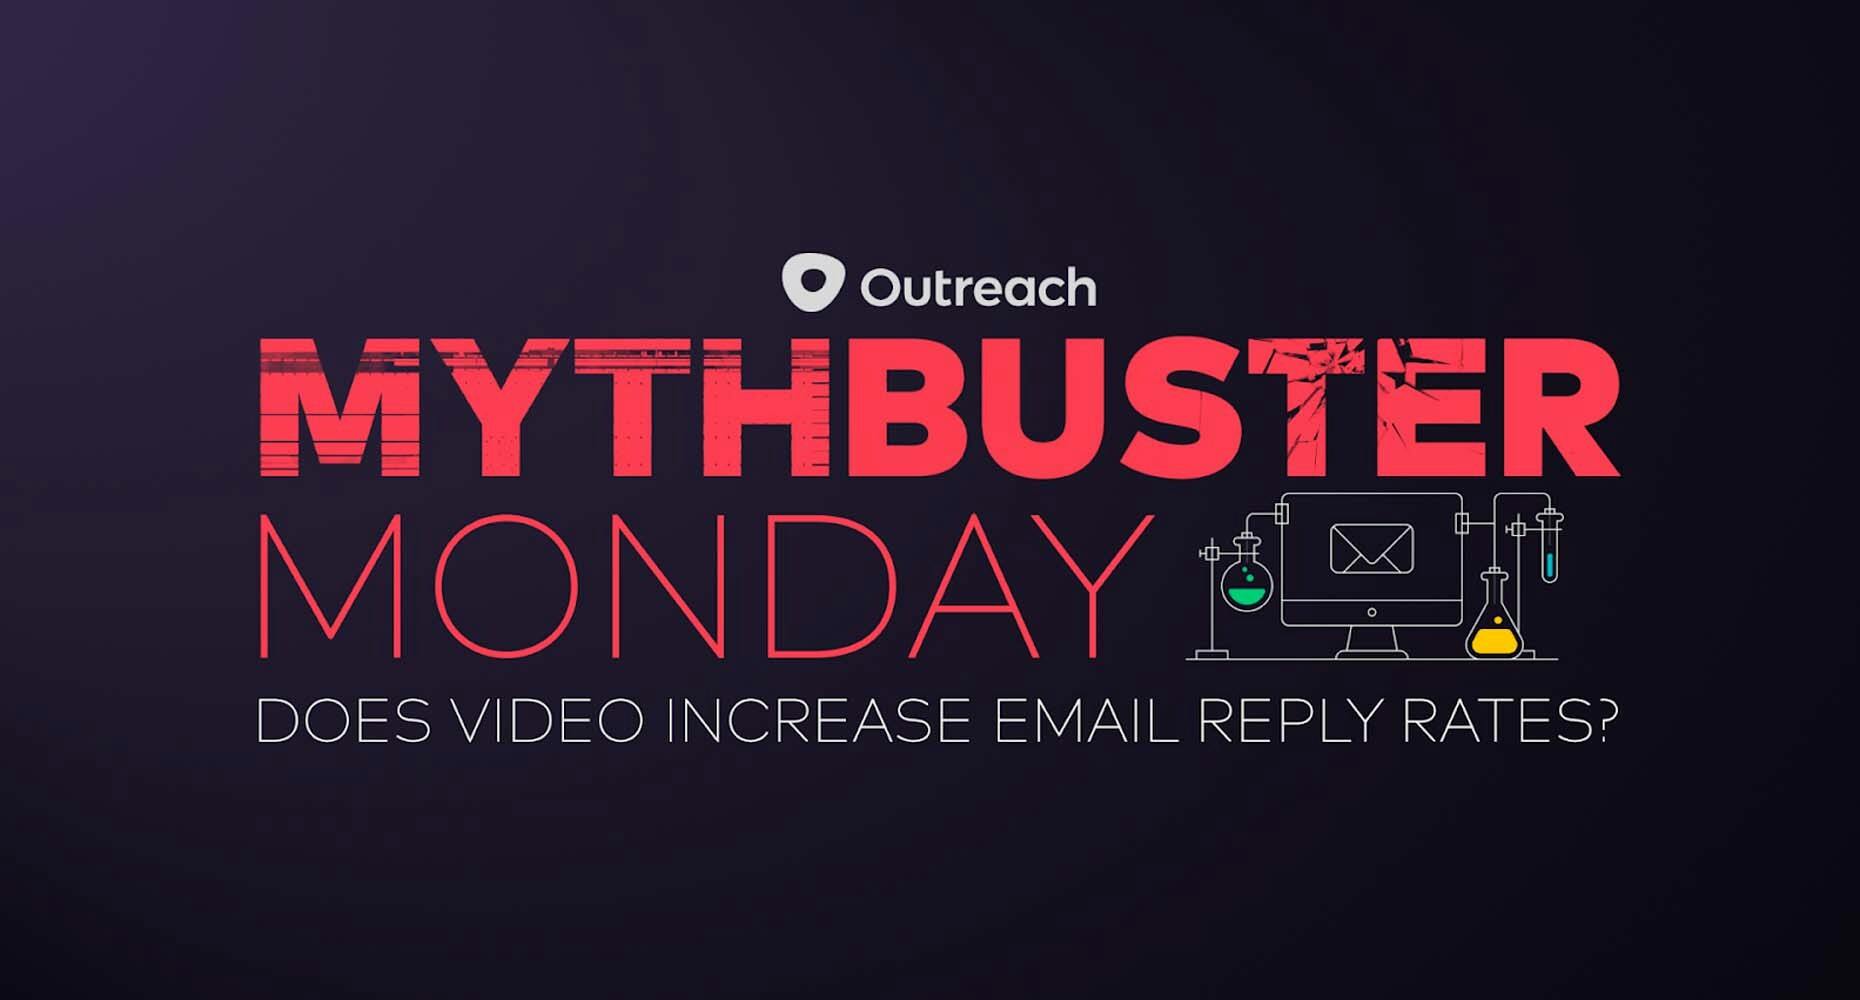 An image promoting "Mythbuster Wednesday" video content, depicting a laptop displaying email metrics and charts, indicating strategies to increase email engagement and debunking common misconceptions, aimed at optimizing email marketing campaigns for better results.